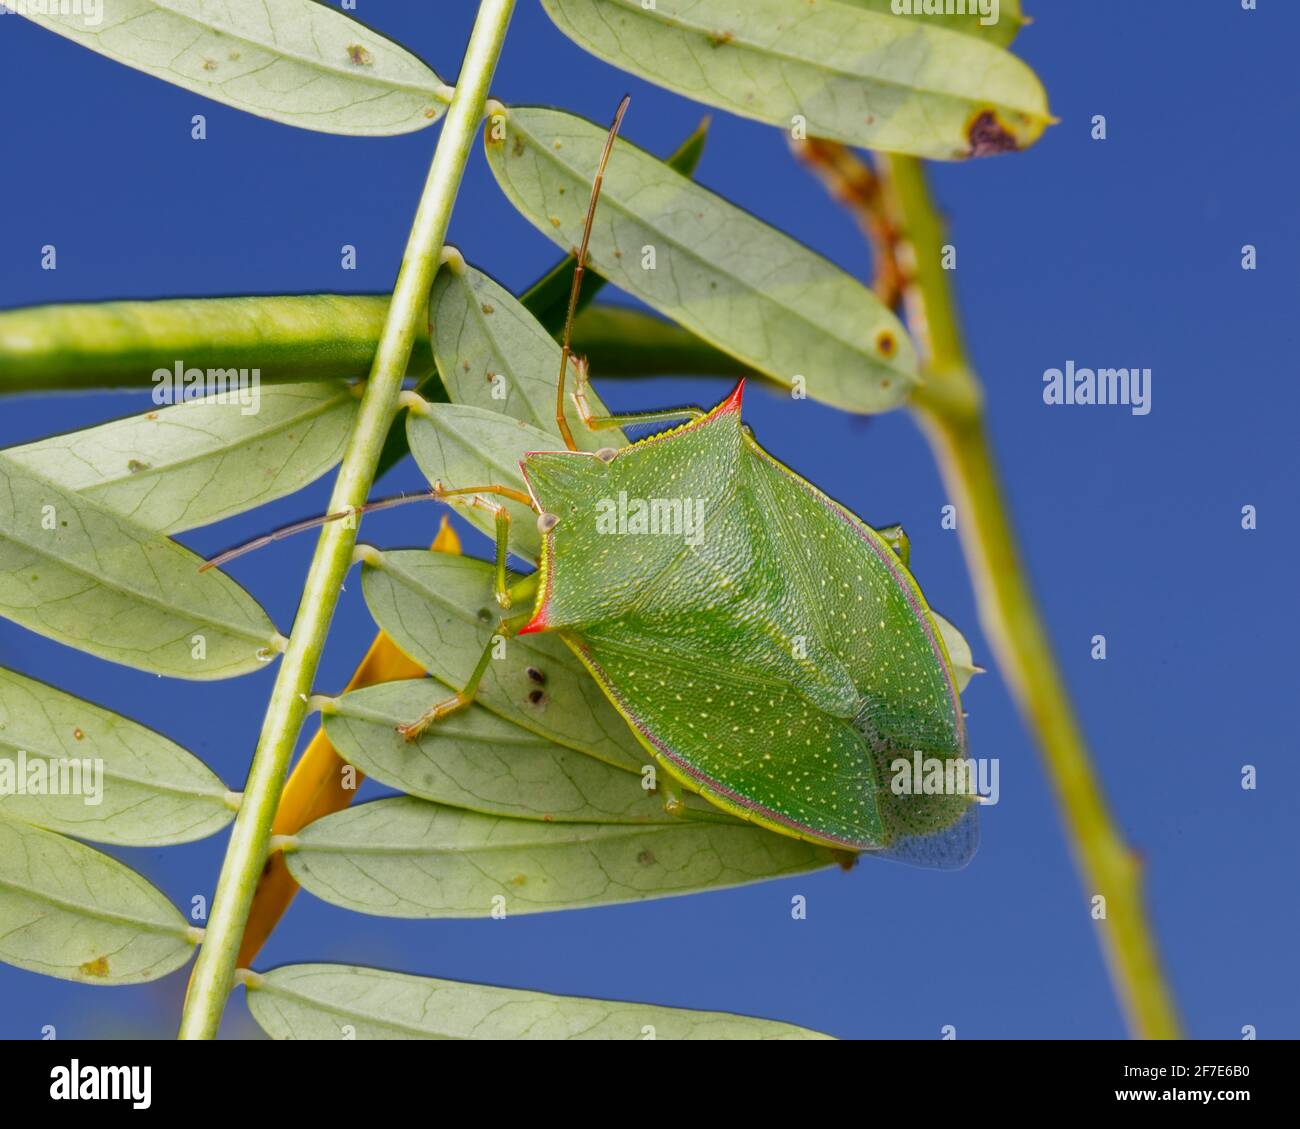 An adult spined green stink bug, Loxa flavicollis, crawling on a legume. Stock Photo